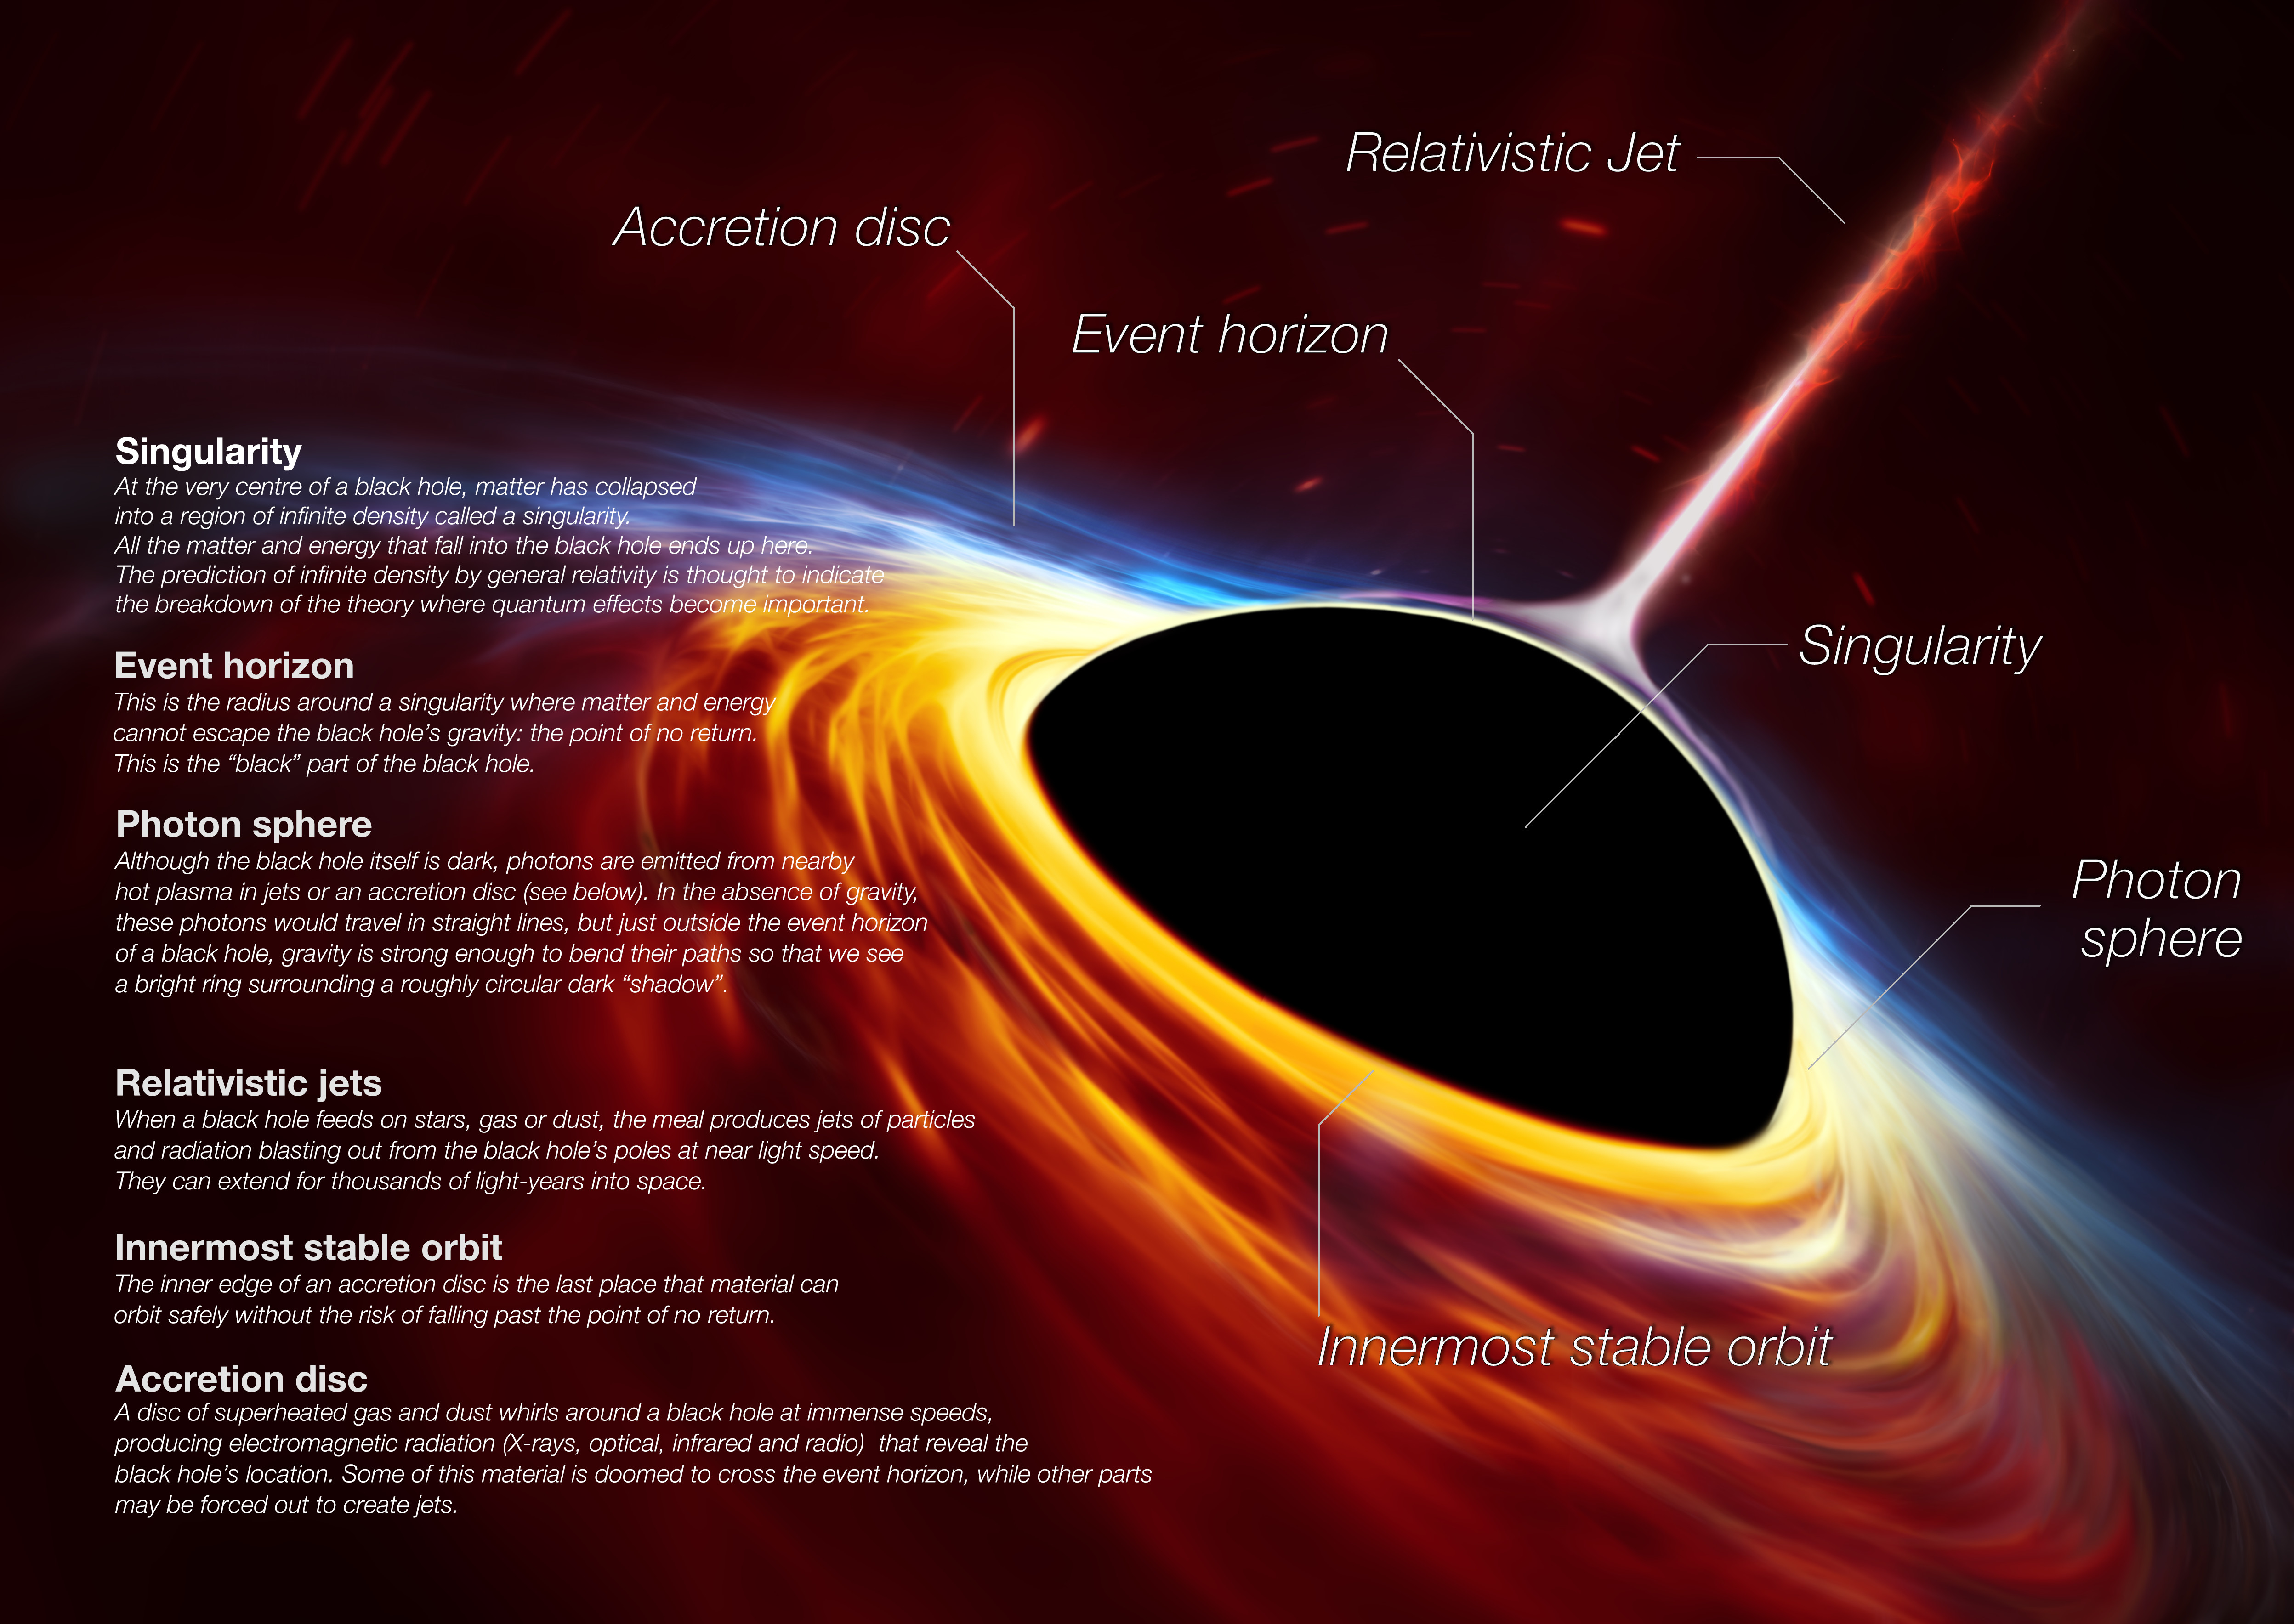 This artist’s impression depicts a rapidly spinning supermassive black hole surrounded by an accretion disc.